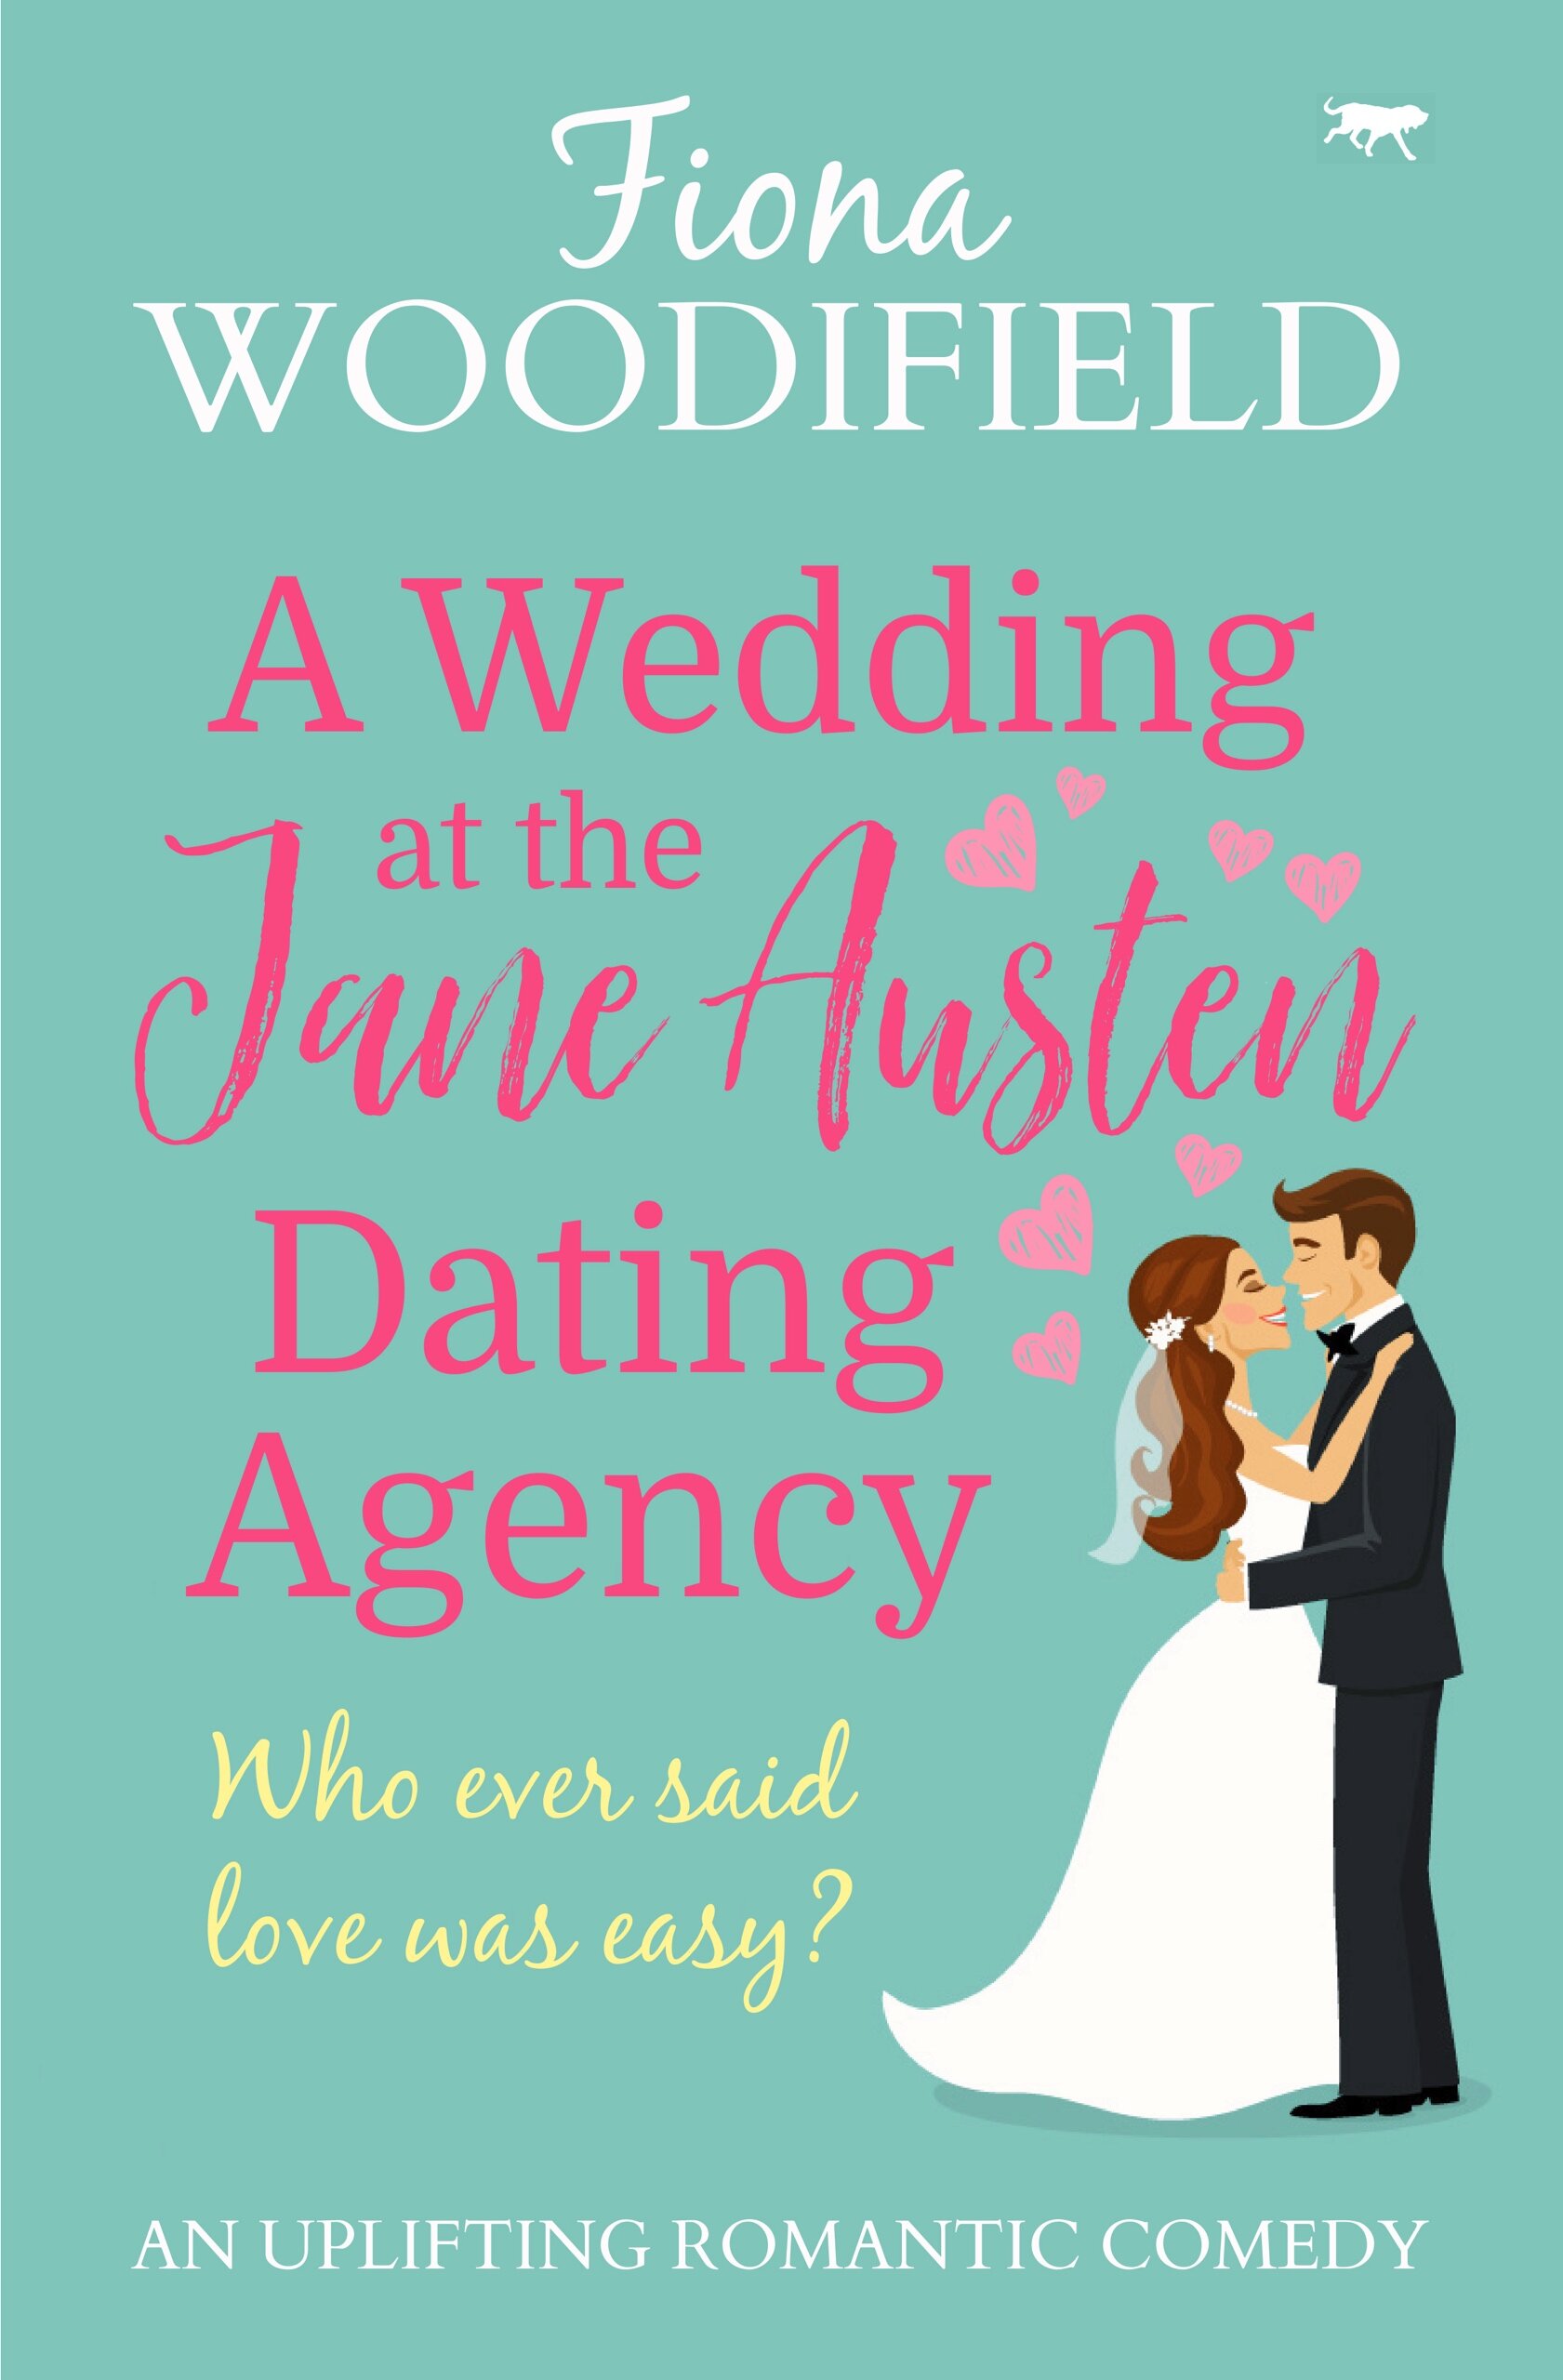 A-Wedding-At-The-Jane-Austen-Dating-Agency-Kindle.jpg